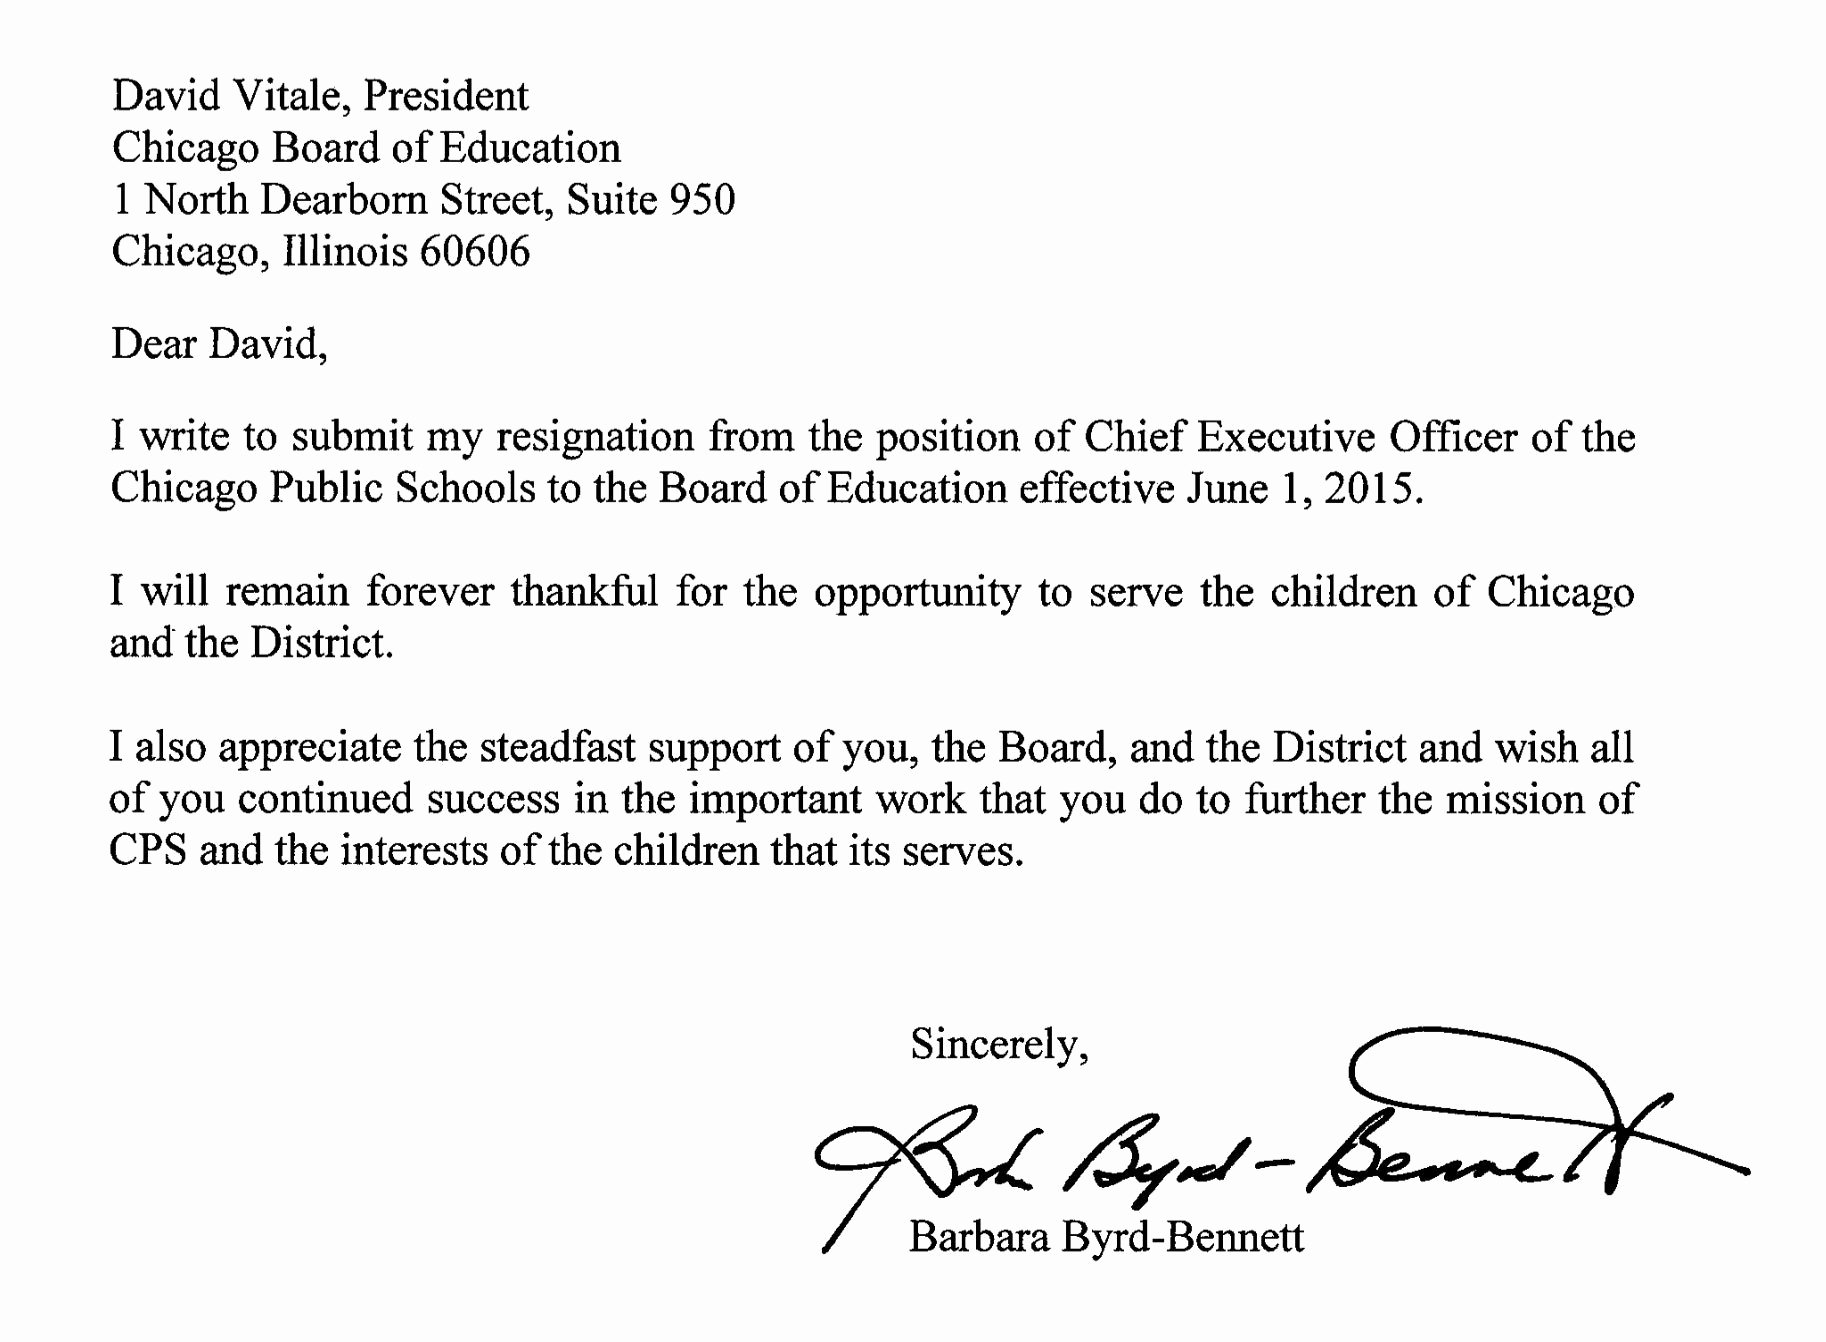 Corporate Officer Resignation Letter Unique Resignation Letter From Cps Chief Barbara byrd Bennett